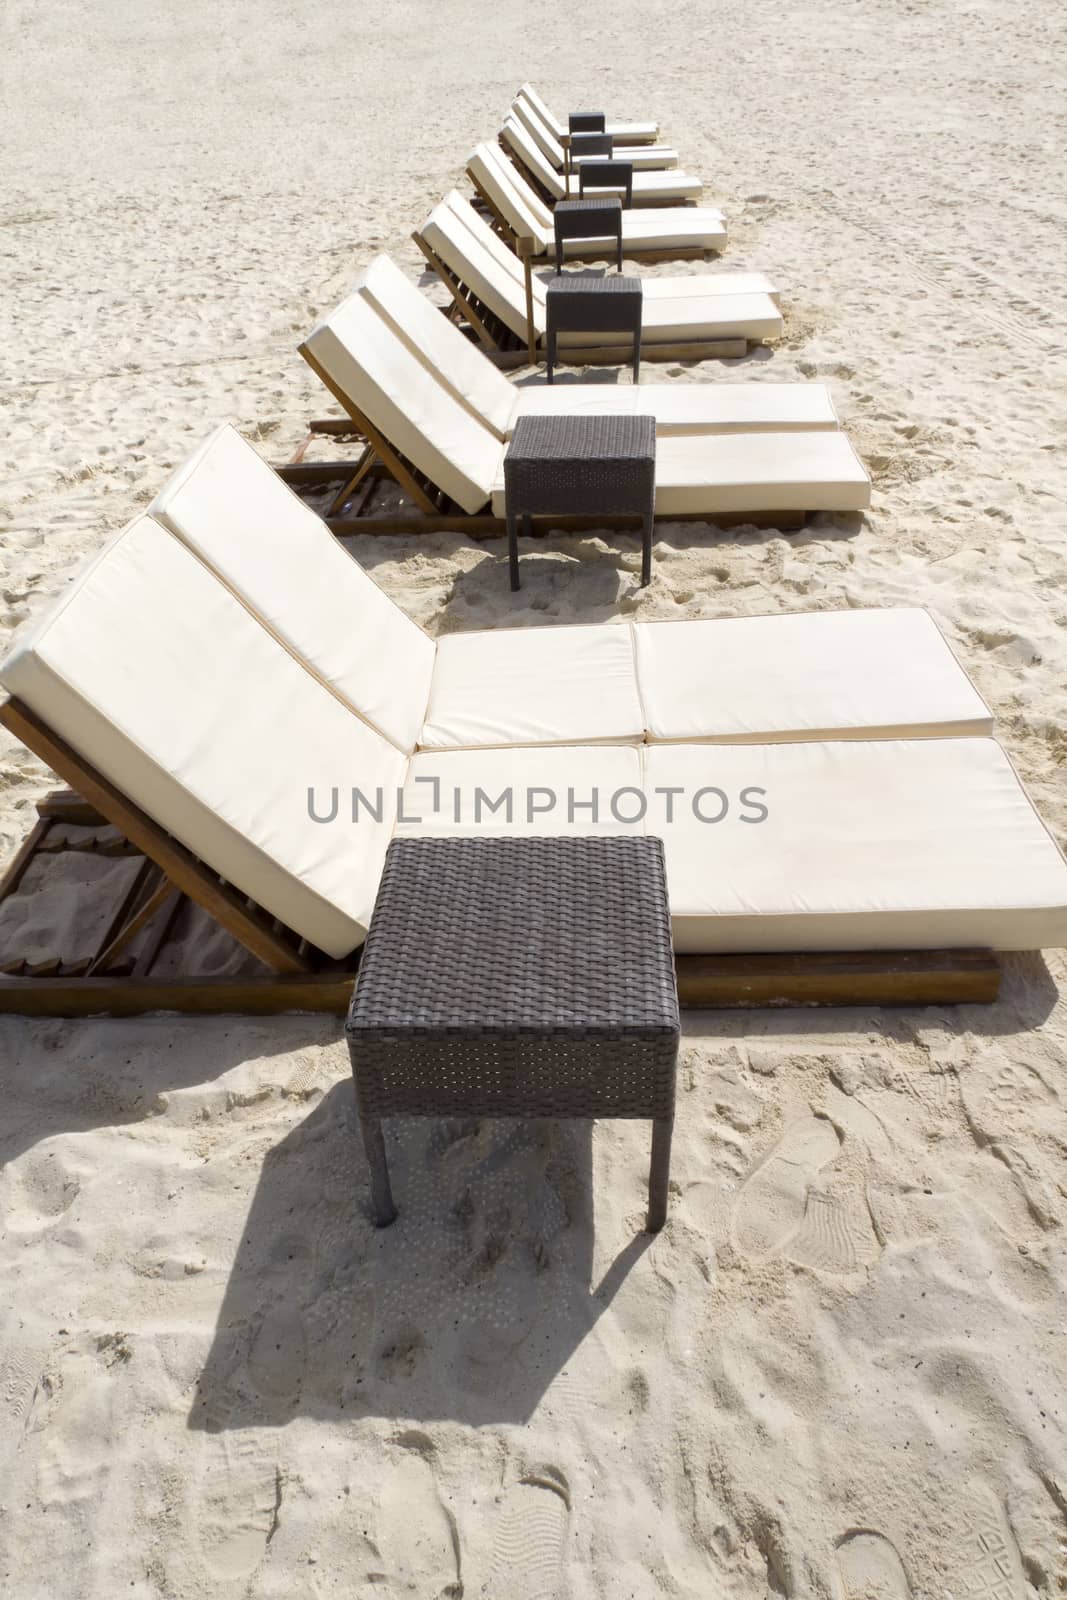 Row of Beach Loungers by Moonb007